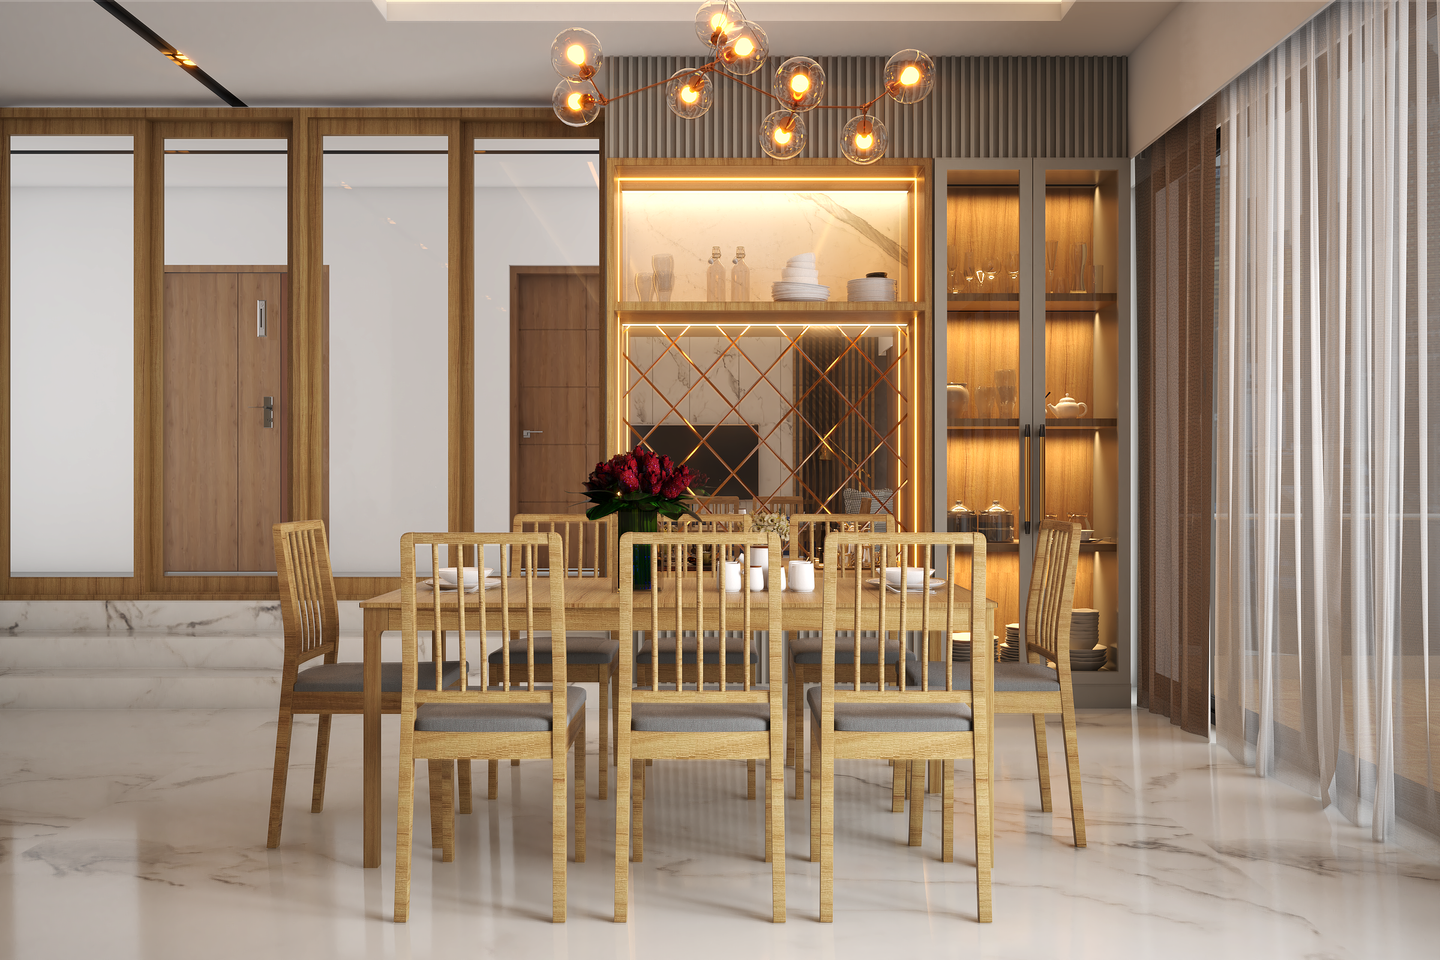 Convenient Eight-Seater Dining Hall Design With Contemporary Interiors -  Livspace